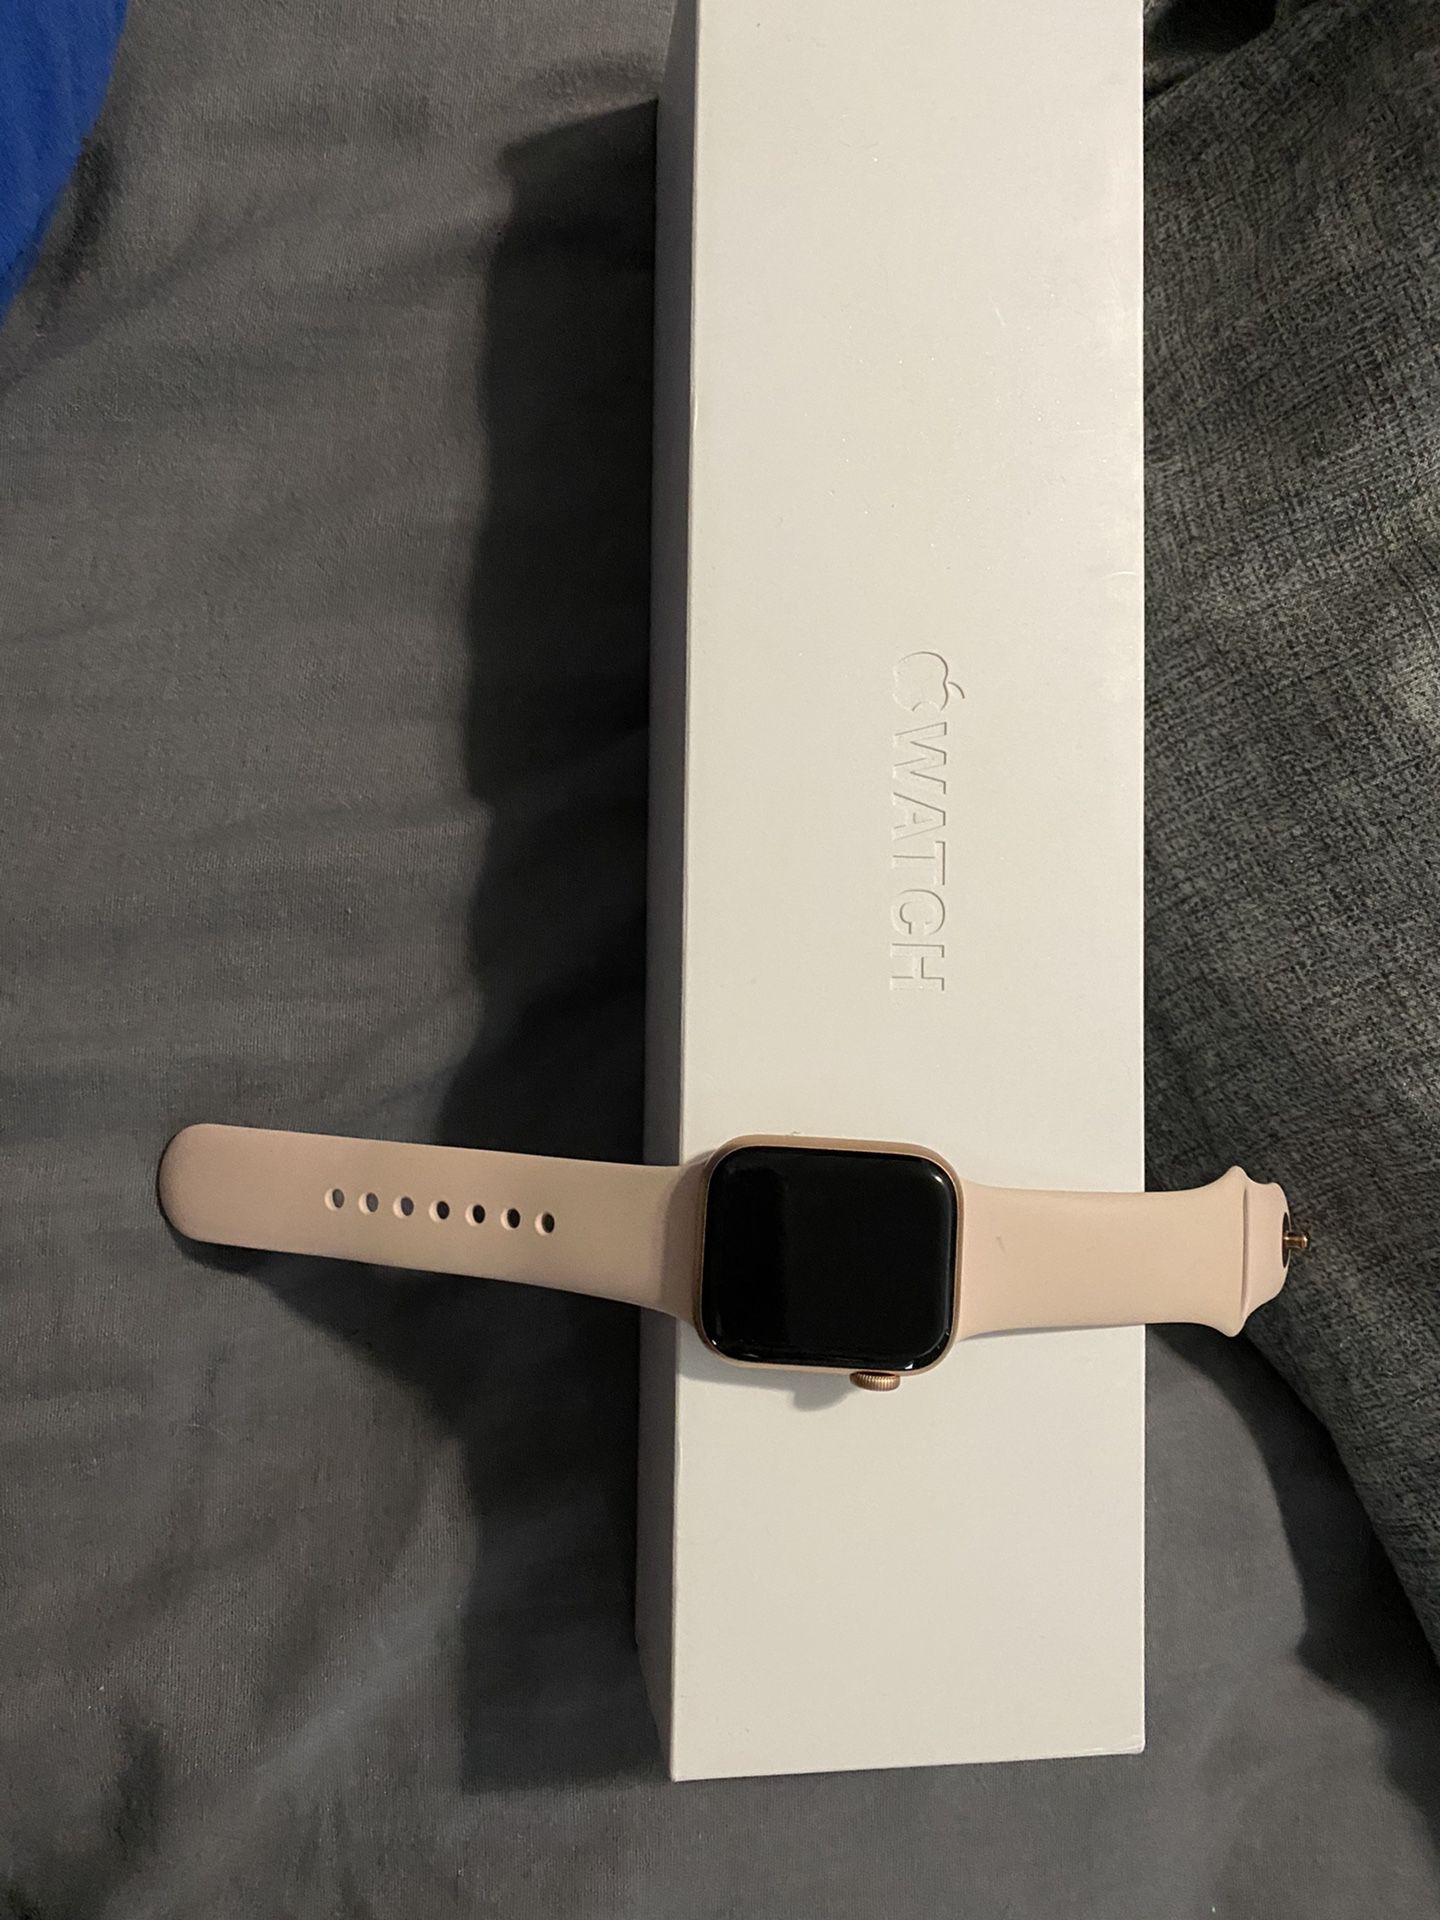 Apple Watch series 4 gps and cellular